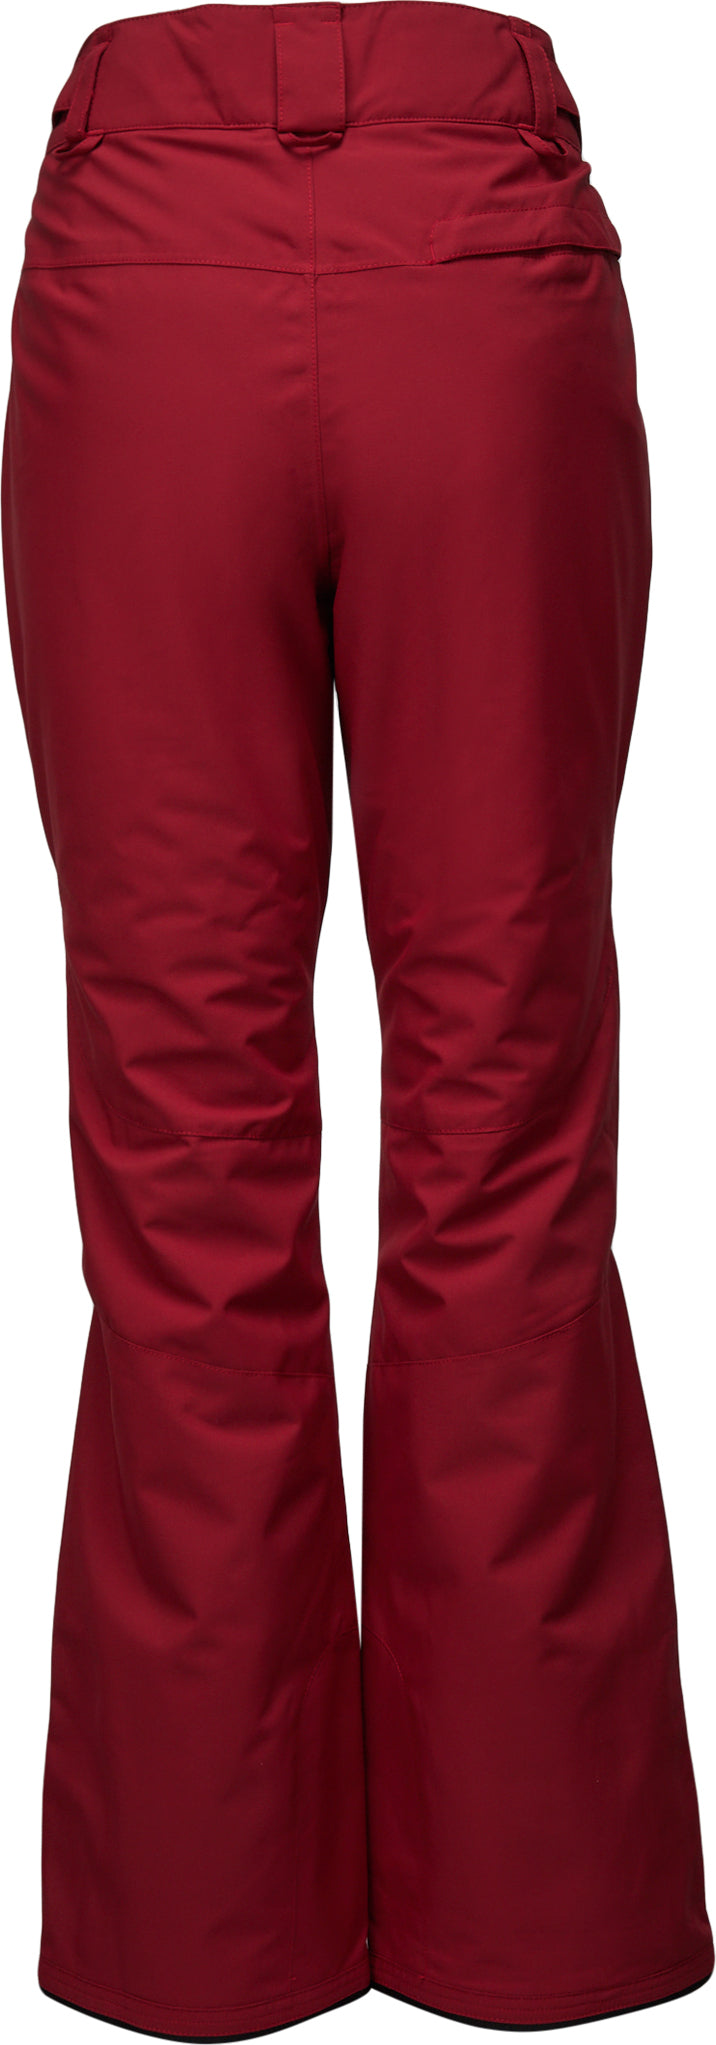 STAR INSULATED PANTS – O'NEILL